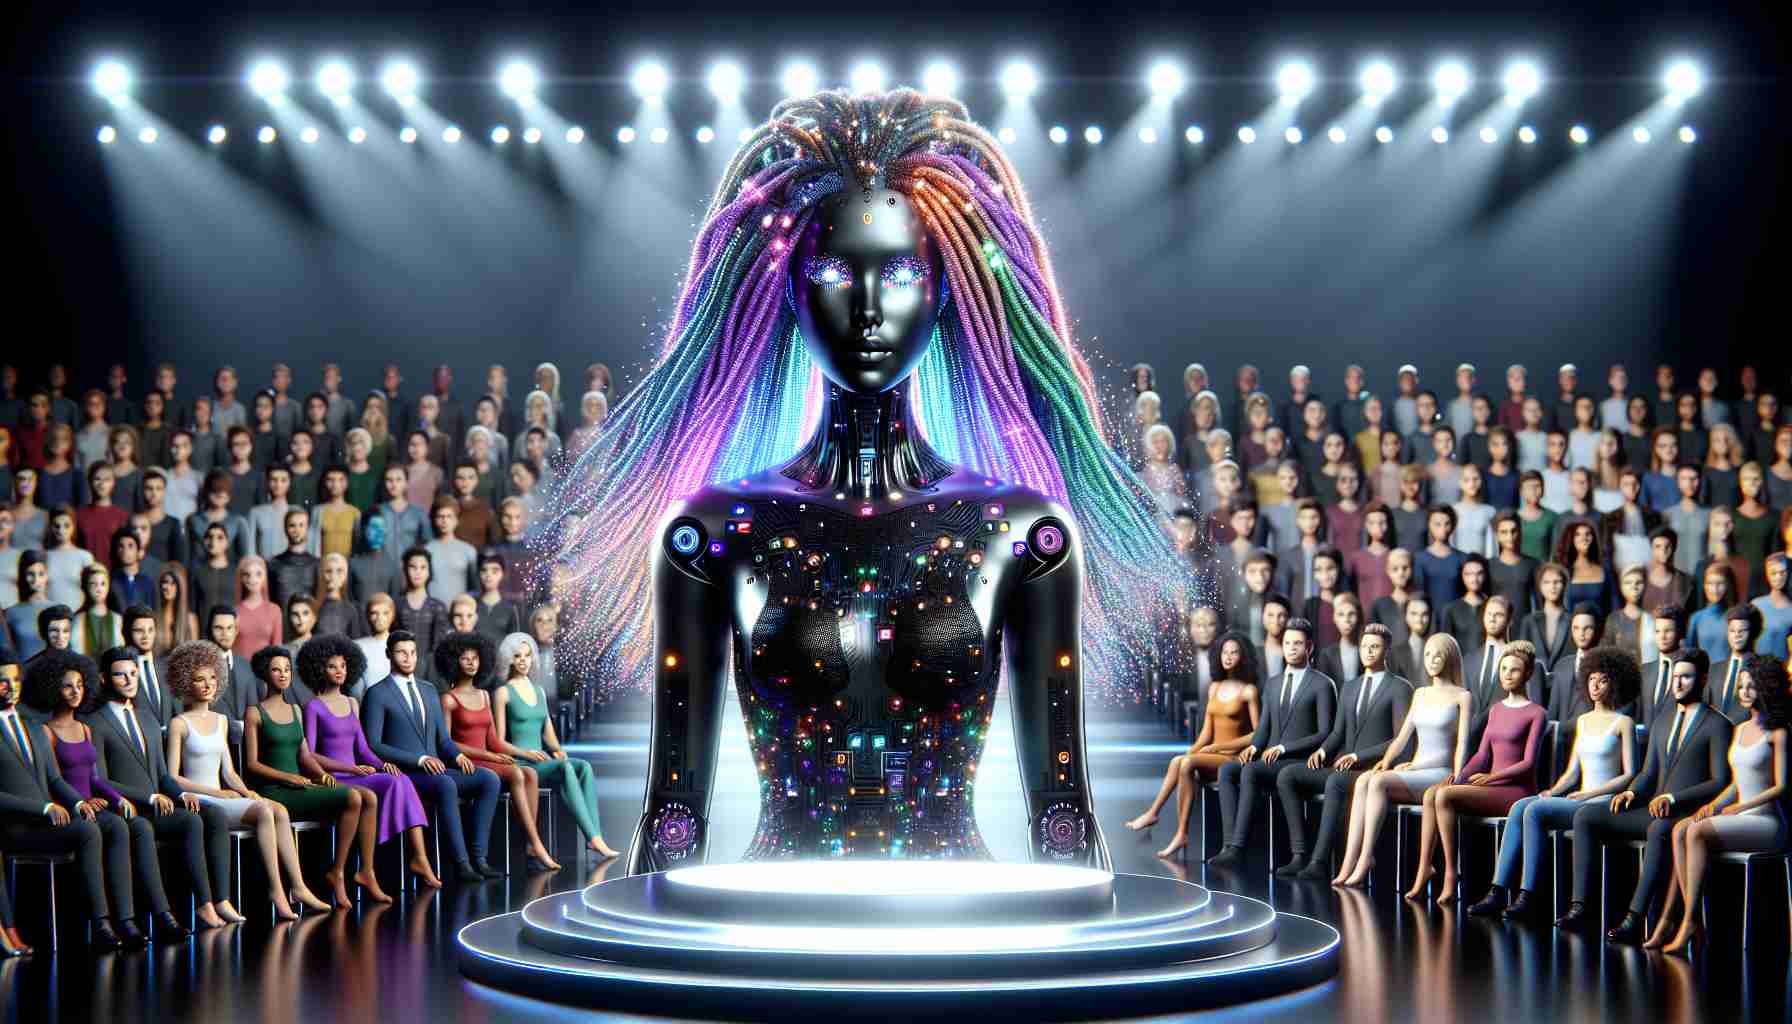 Revolutionizing Beauty Contests: "Miss AI" Leads the Way